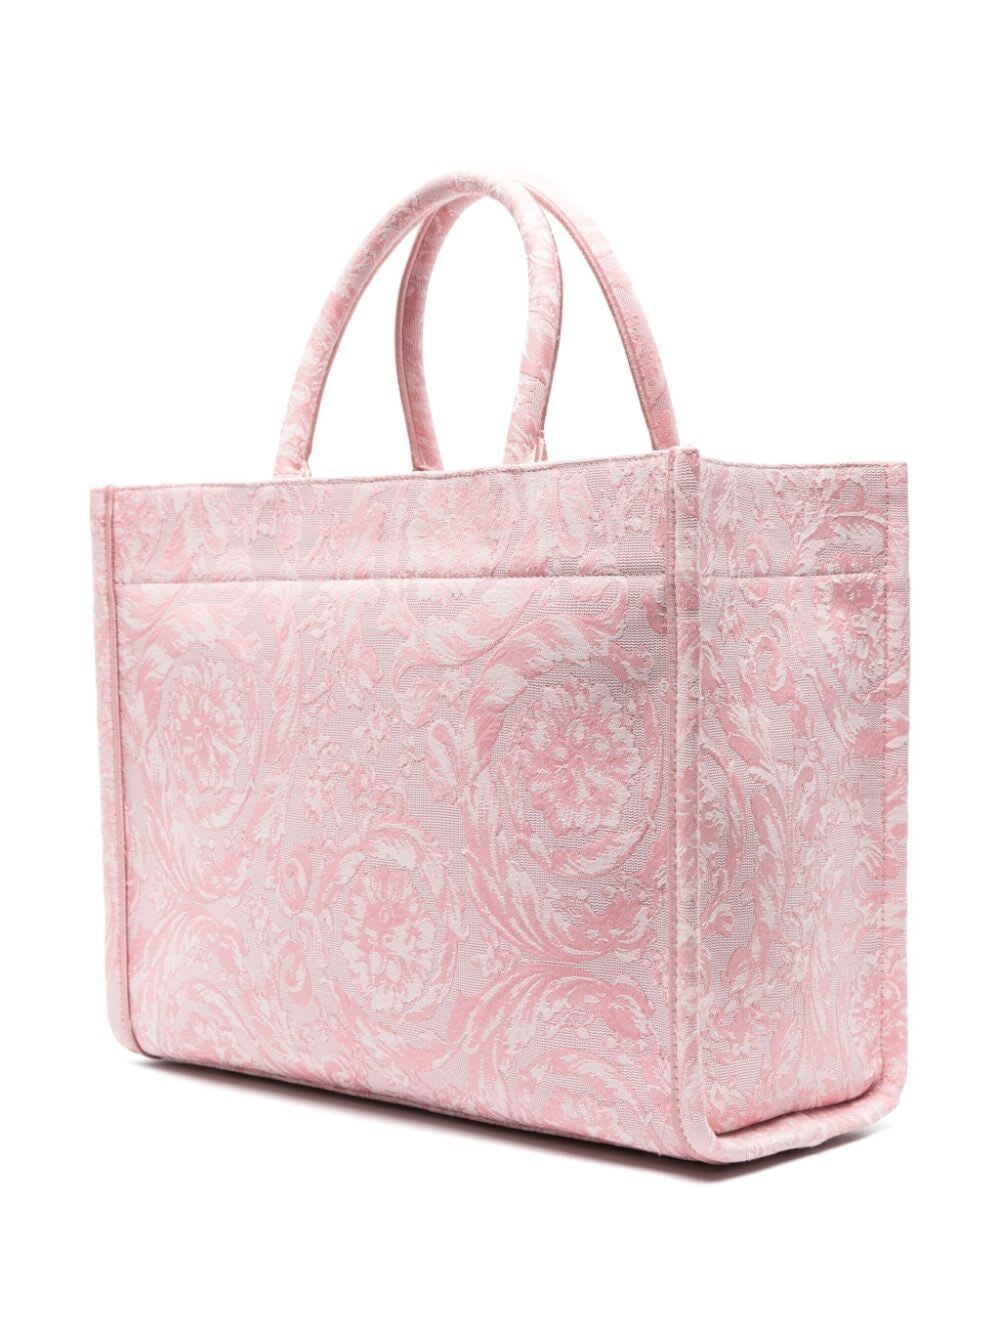 Shop Versace Large Tote Embroidery Jacquard In V Pale Pink English Rose  Gold